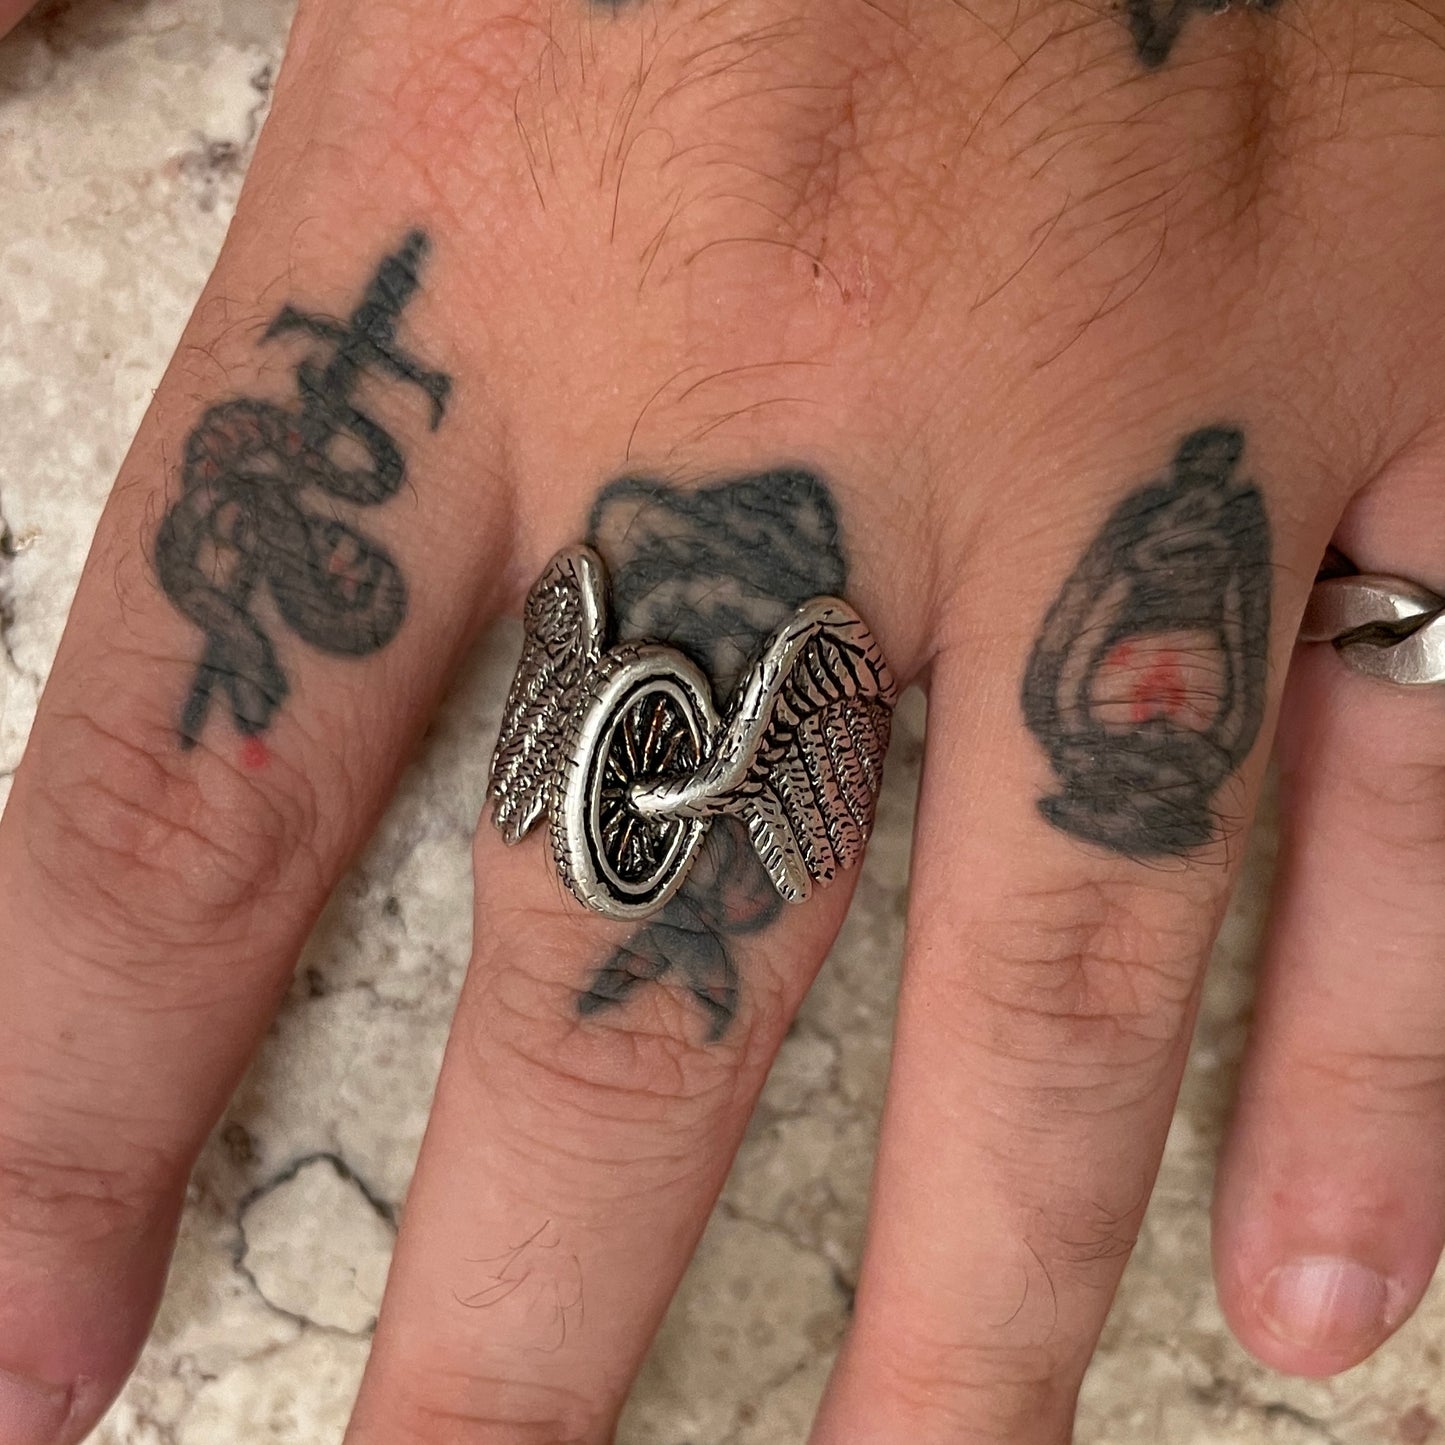 G&S Winged Wheel Ring [Size 11.5]